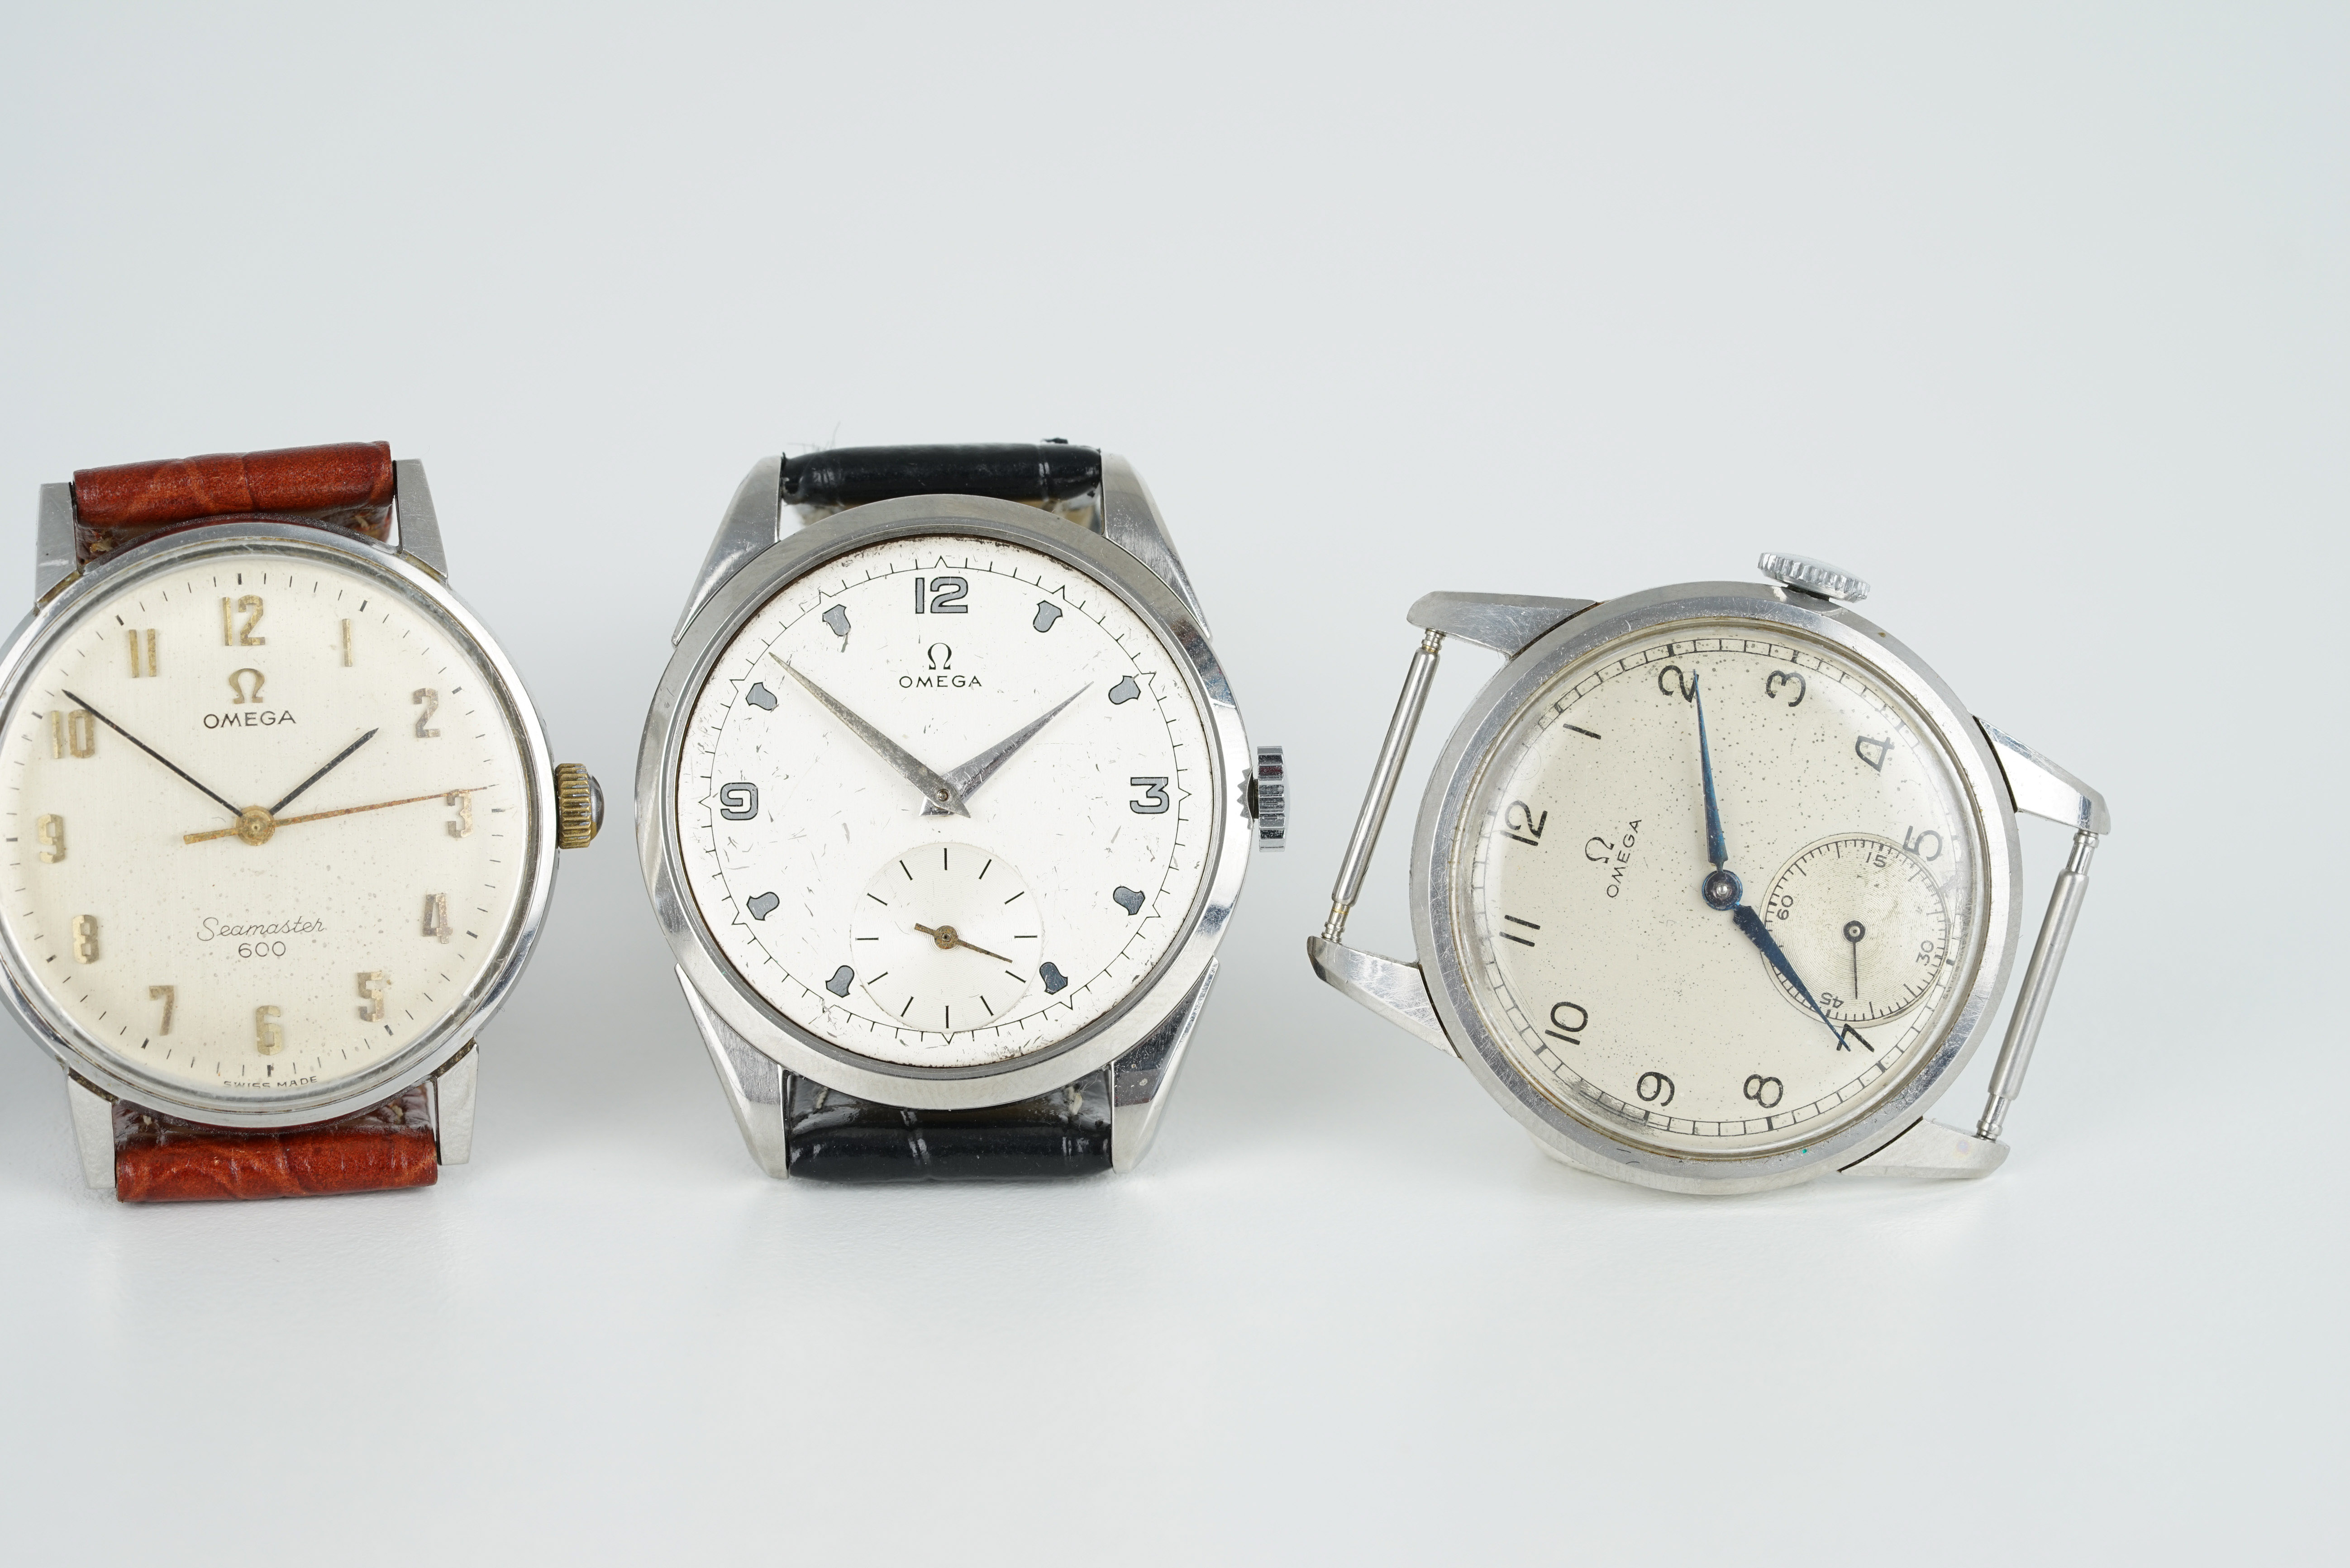 GROUP OF 4 OMEGA WRISTWATCHES, all stainless steel cases with manually wound movements inside, all - Image 3 of 3